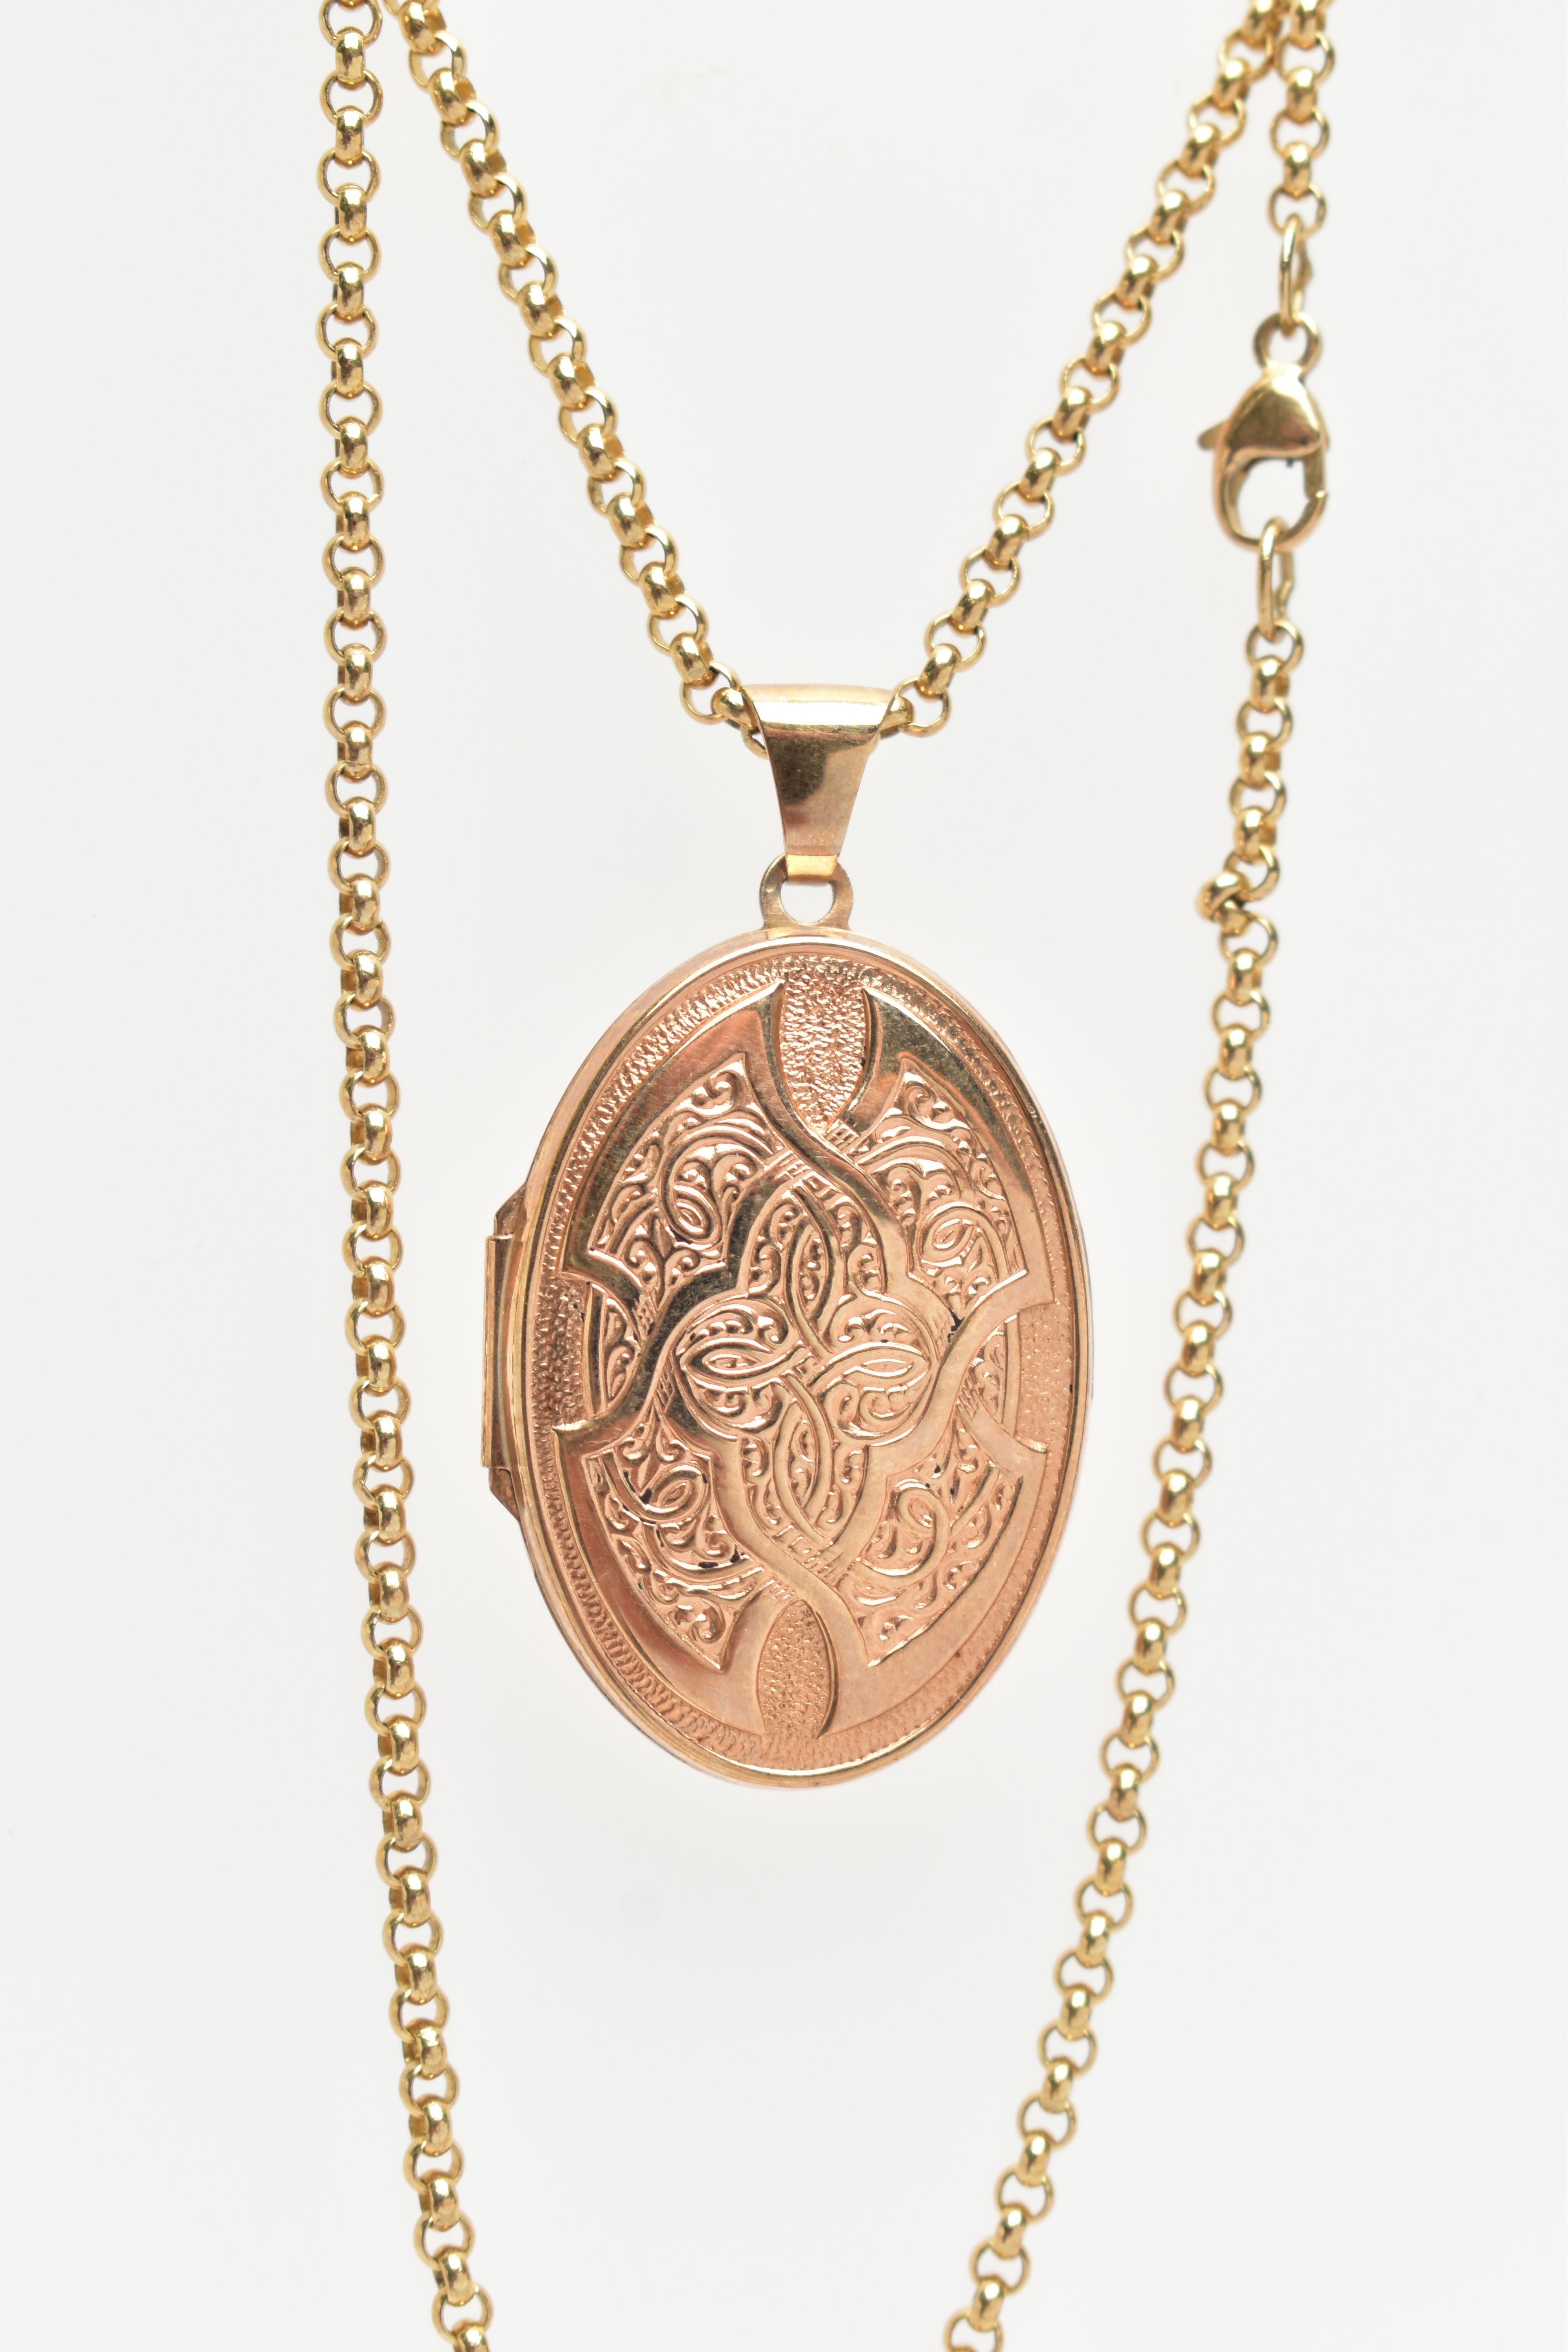 A 9CT GOLD LOCKET AND CHAIN, the hinged locket of an oval form decorated with a Celtic pattern to